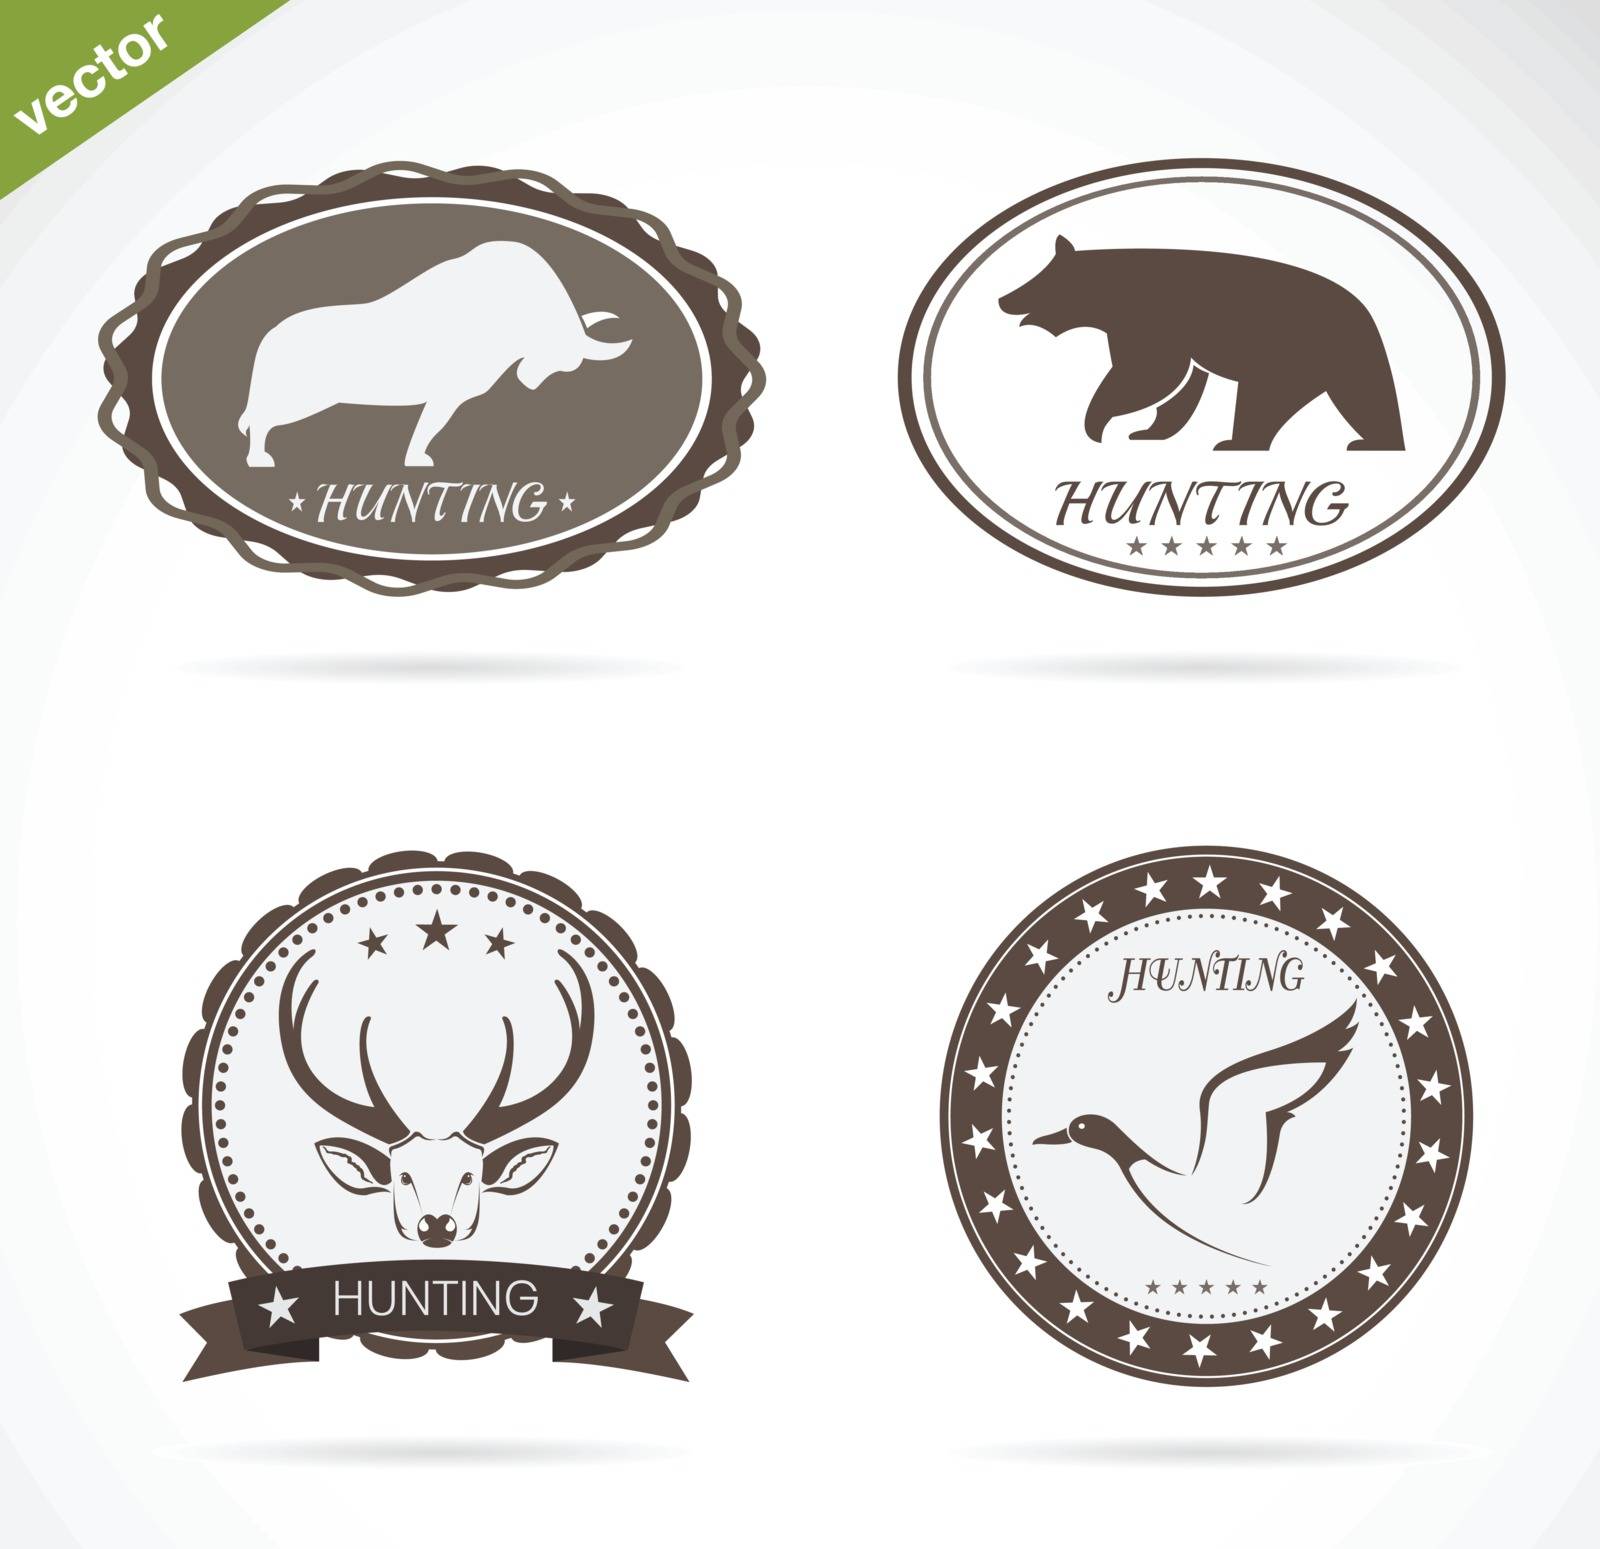 Hunting labels set on a white background